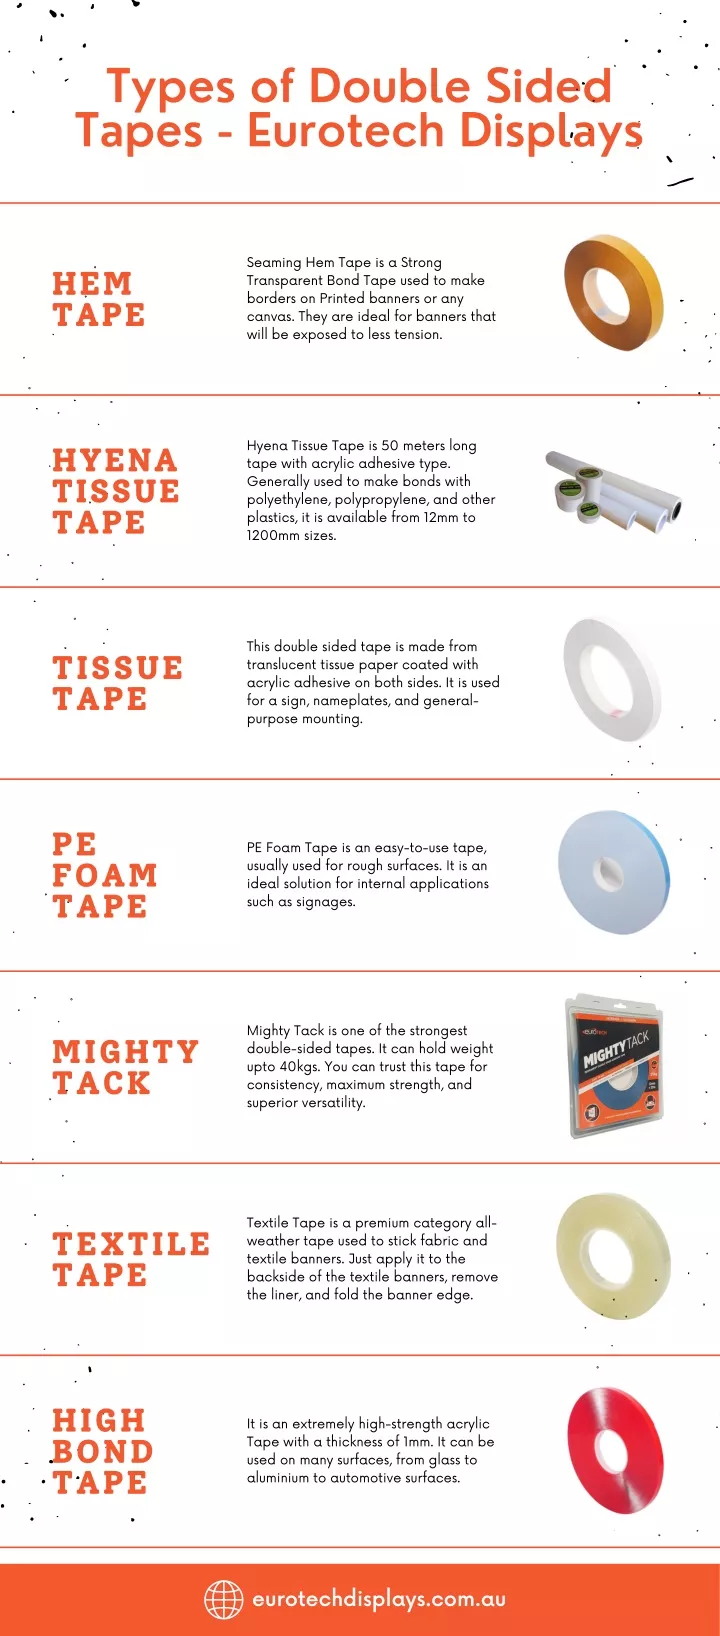 types of double sided tapes eurotech displays